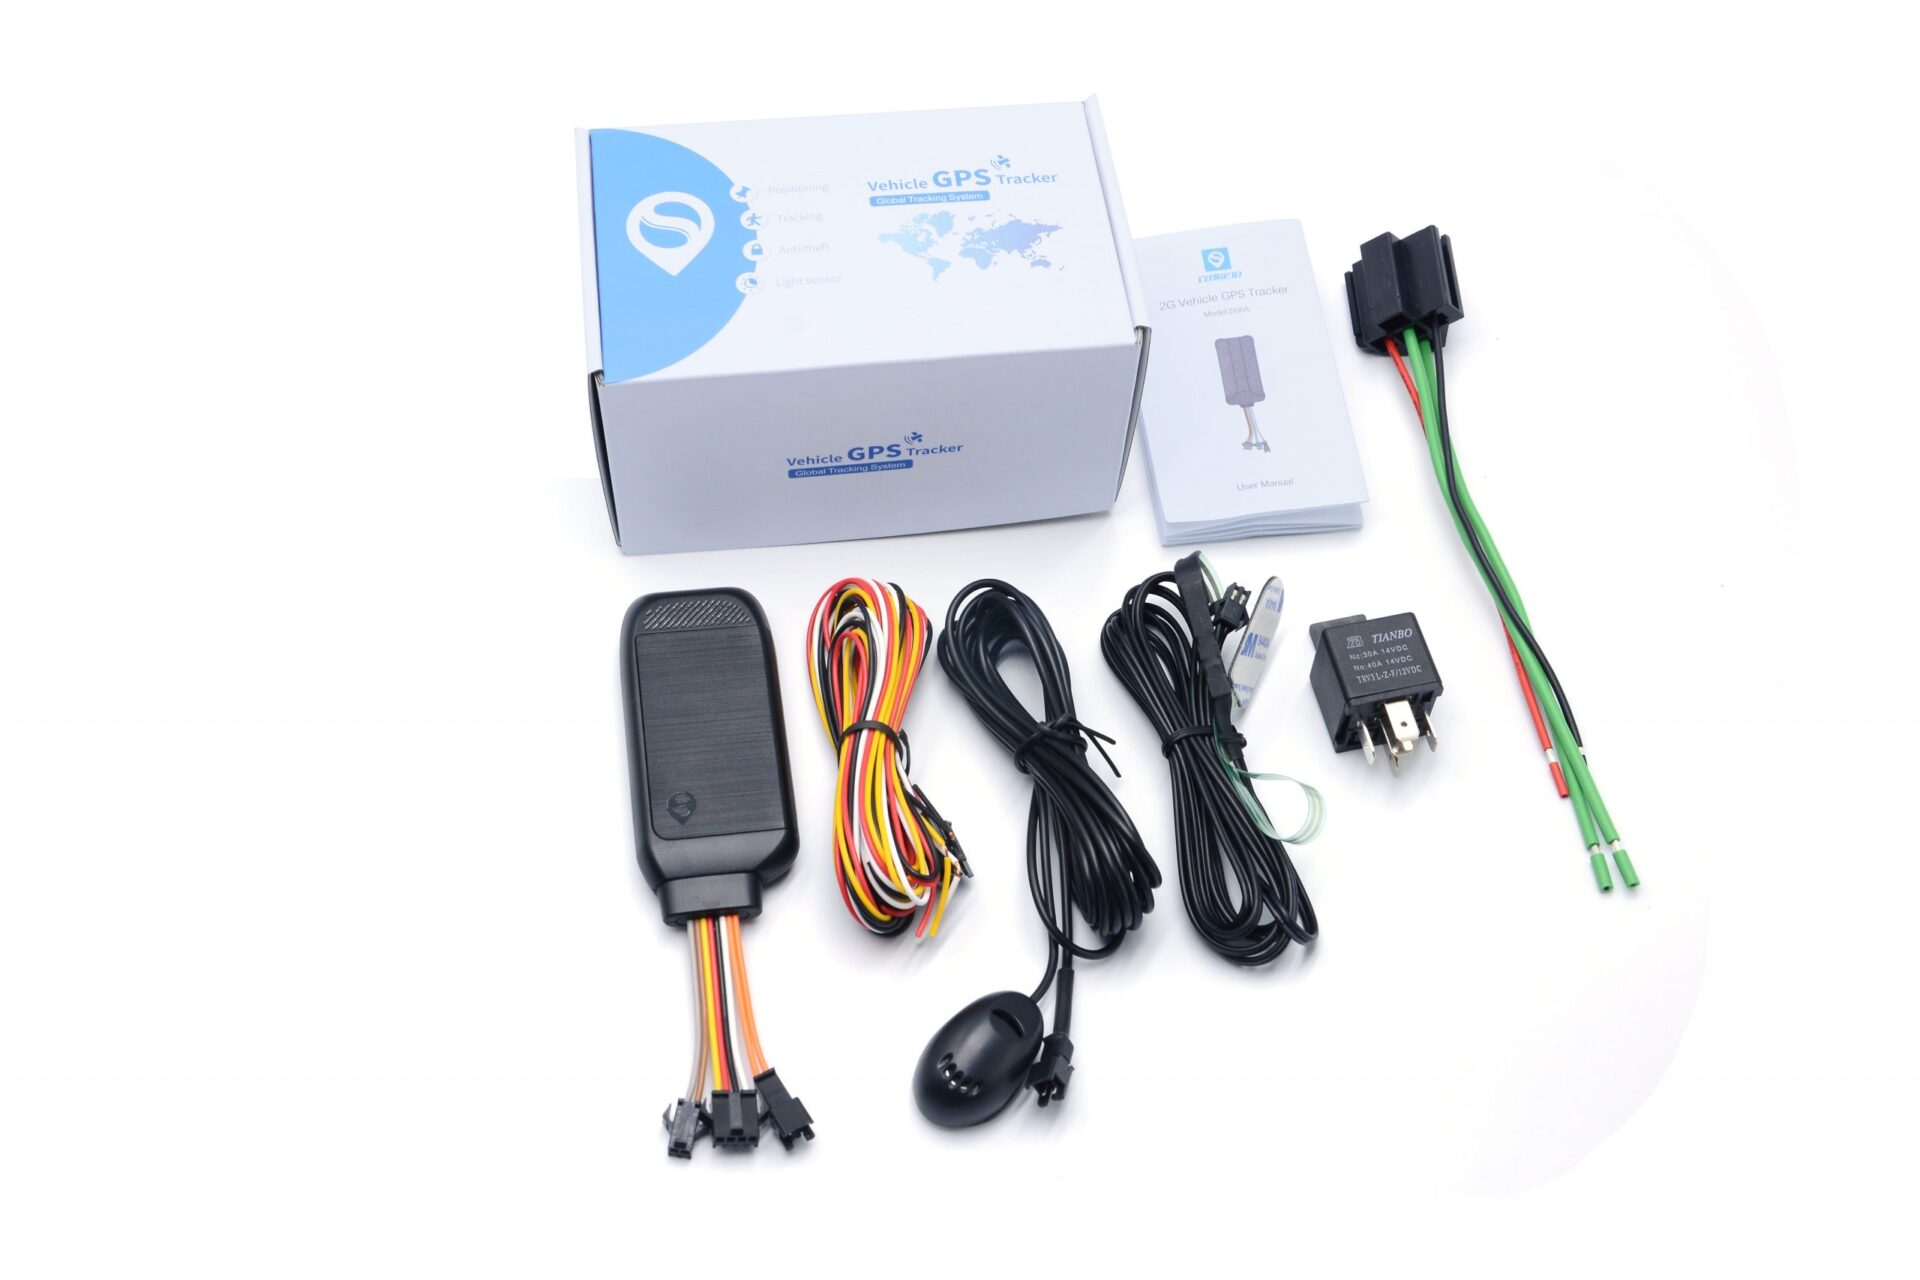 R31 - 2G Hardwired Fleet GPS Tracker for Auto Finance Companies and Credit  Unions with Voice Listening & Alerts Feature